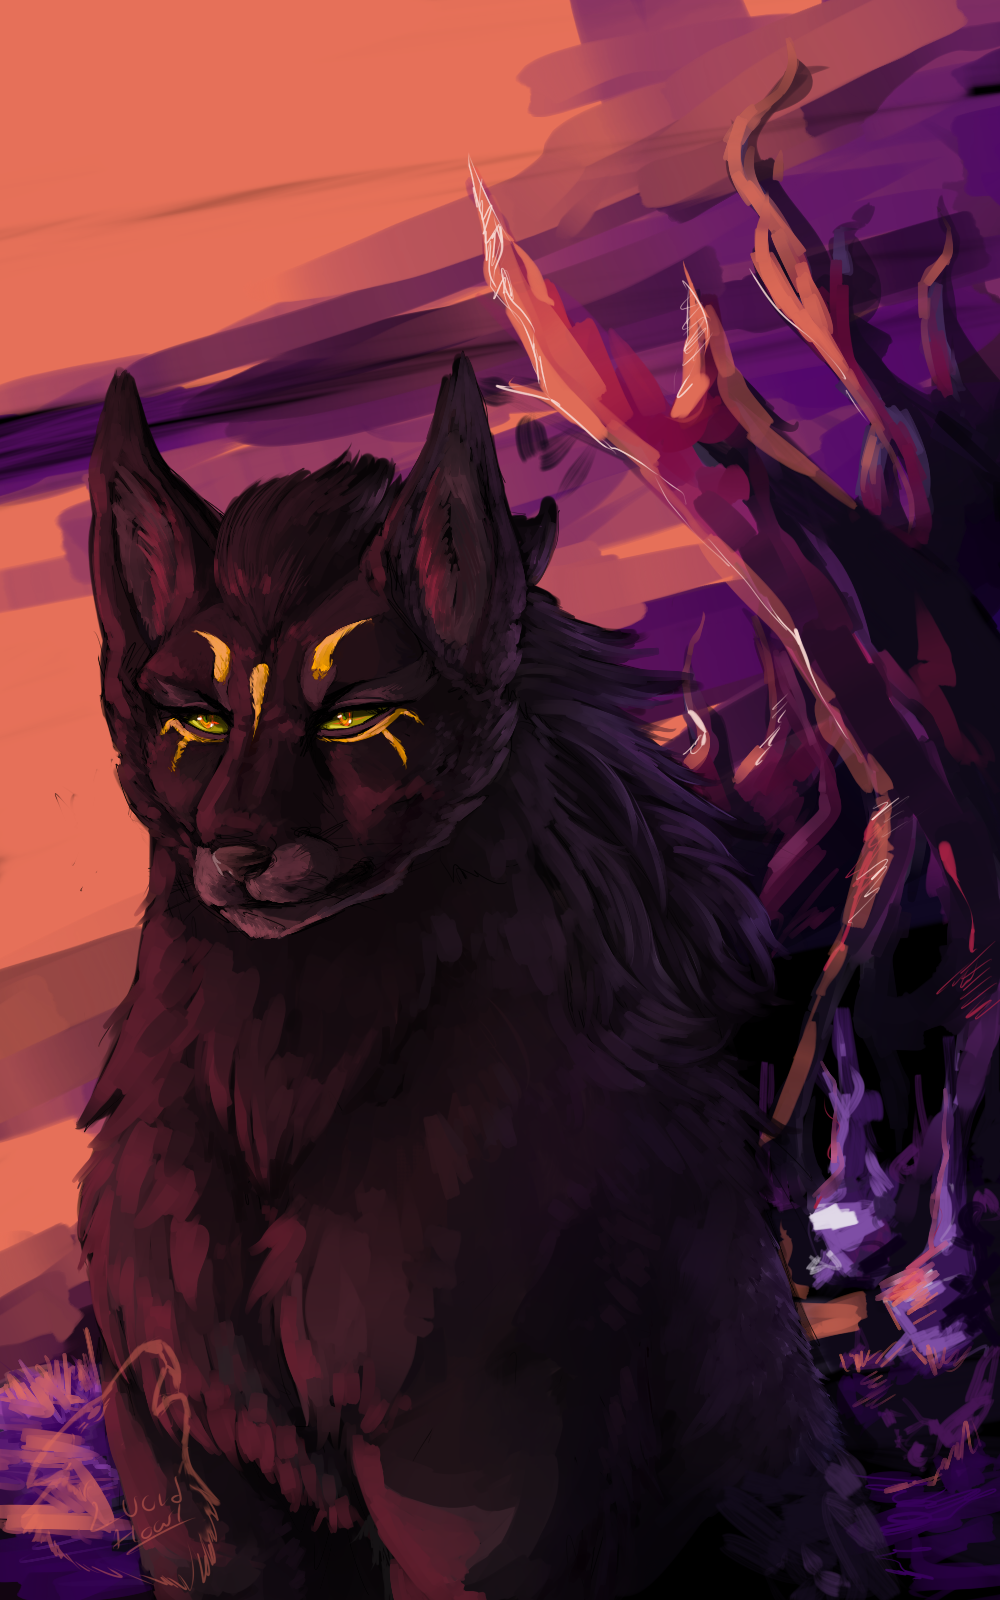 kuro_by_lucidhowl-dbf62i6.png